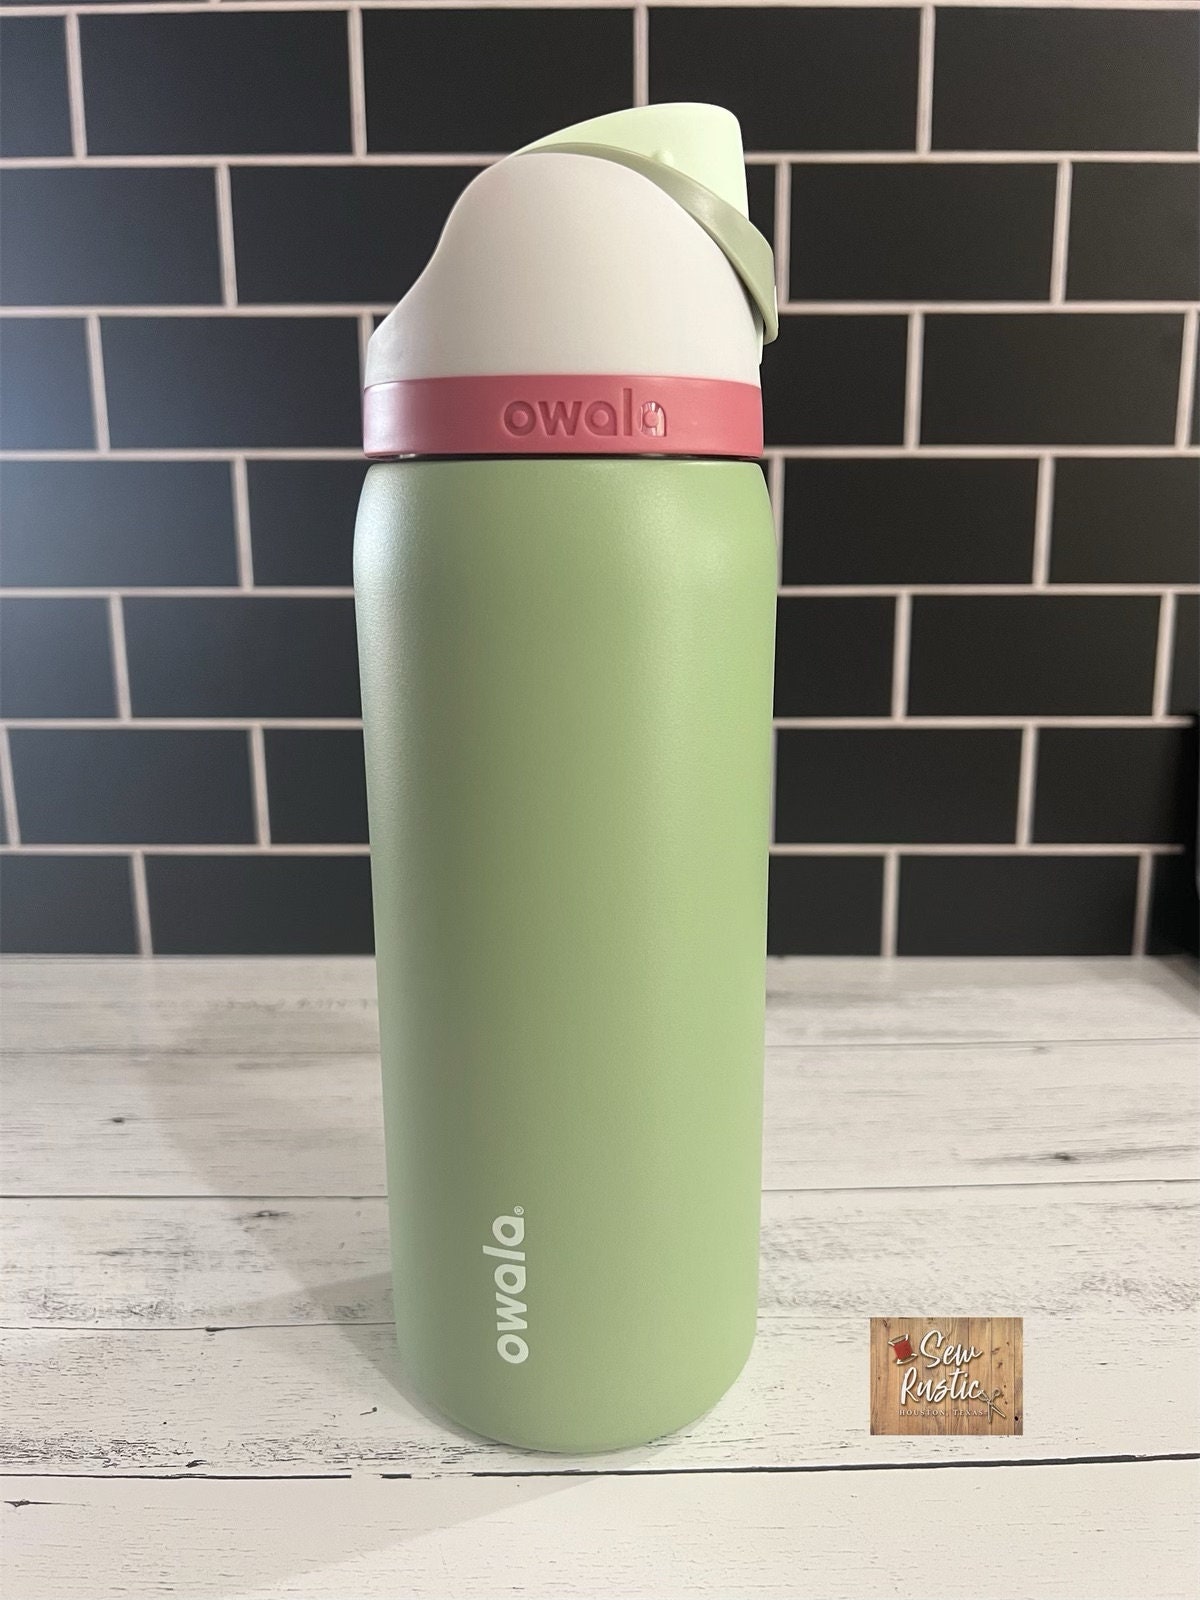 Replying to @Michelle 🩷 #owala #owalawaterbottle #owalafreesip